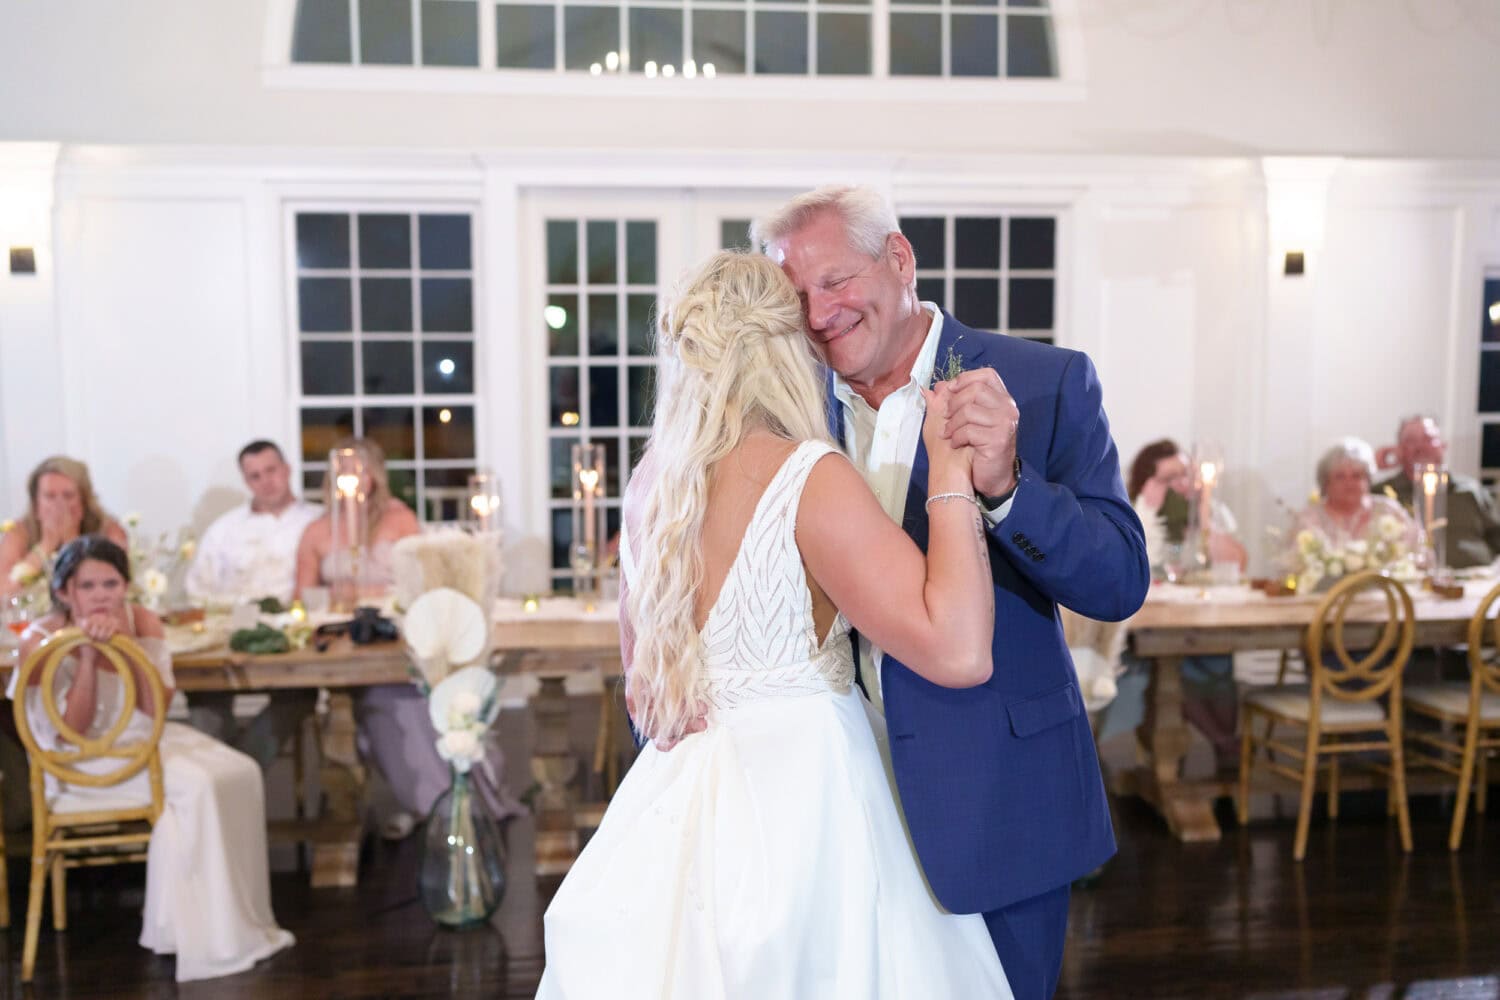 Father daughter dance - The Village House at Litchfield